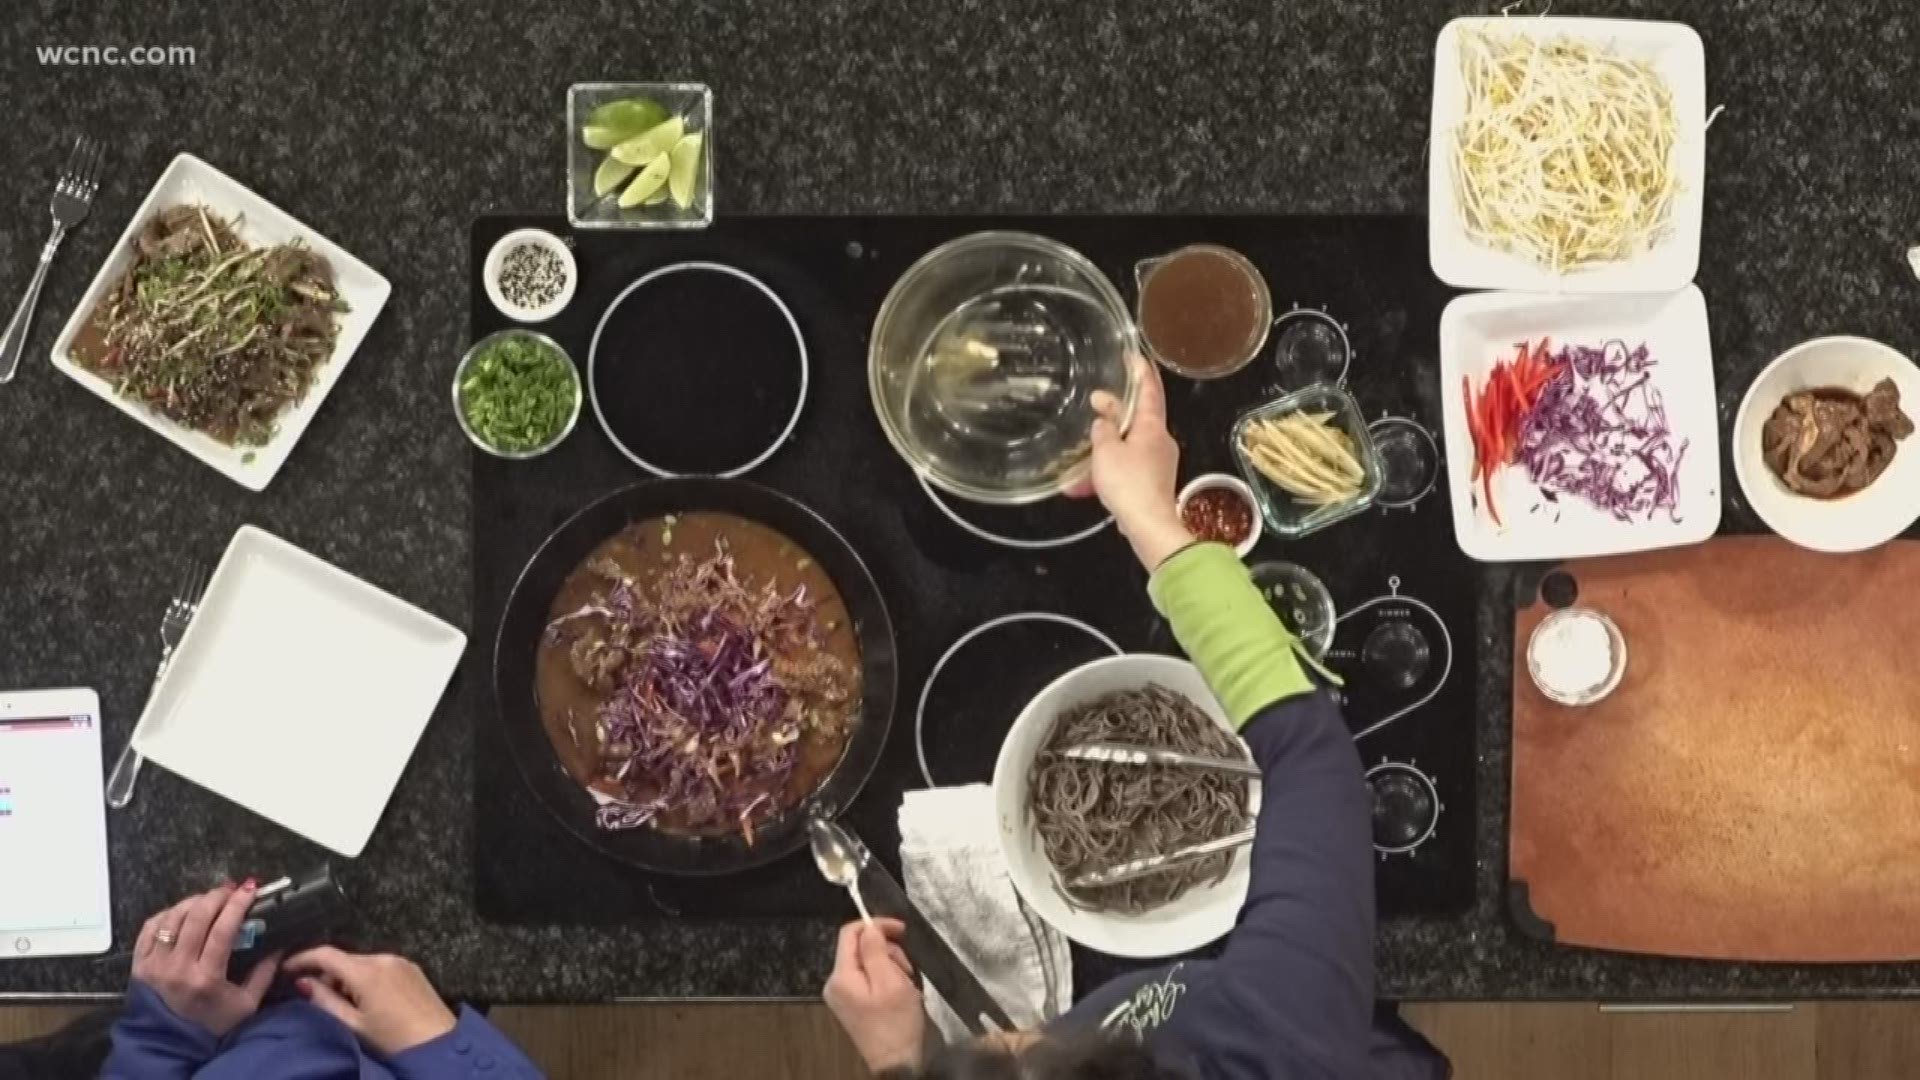 Chef Alyssa Wilen makes a flavor-packed stir fry recipe that feeds the whole family.